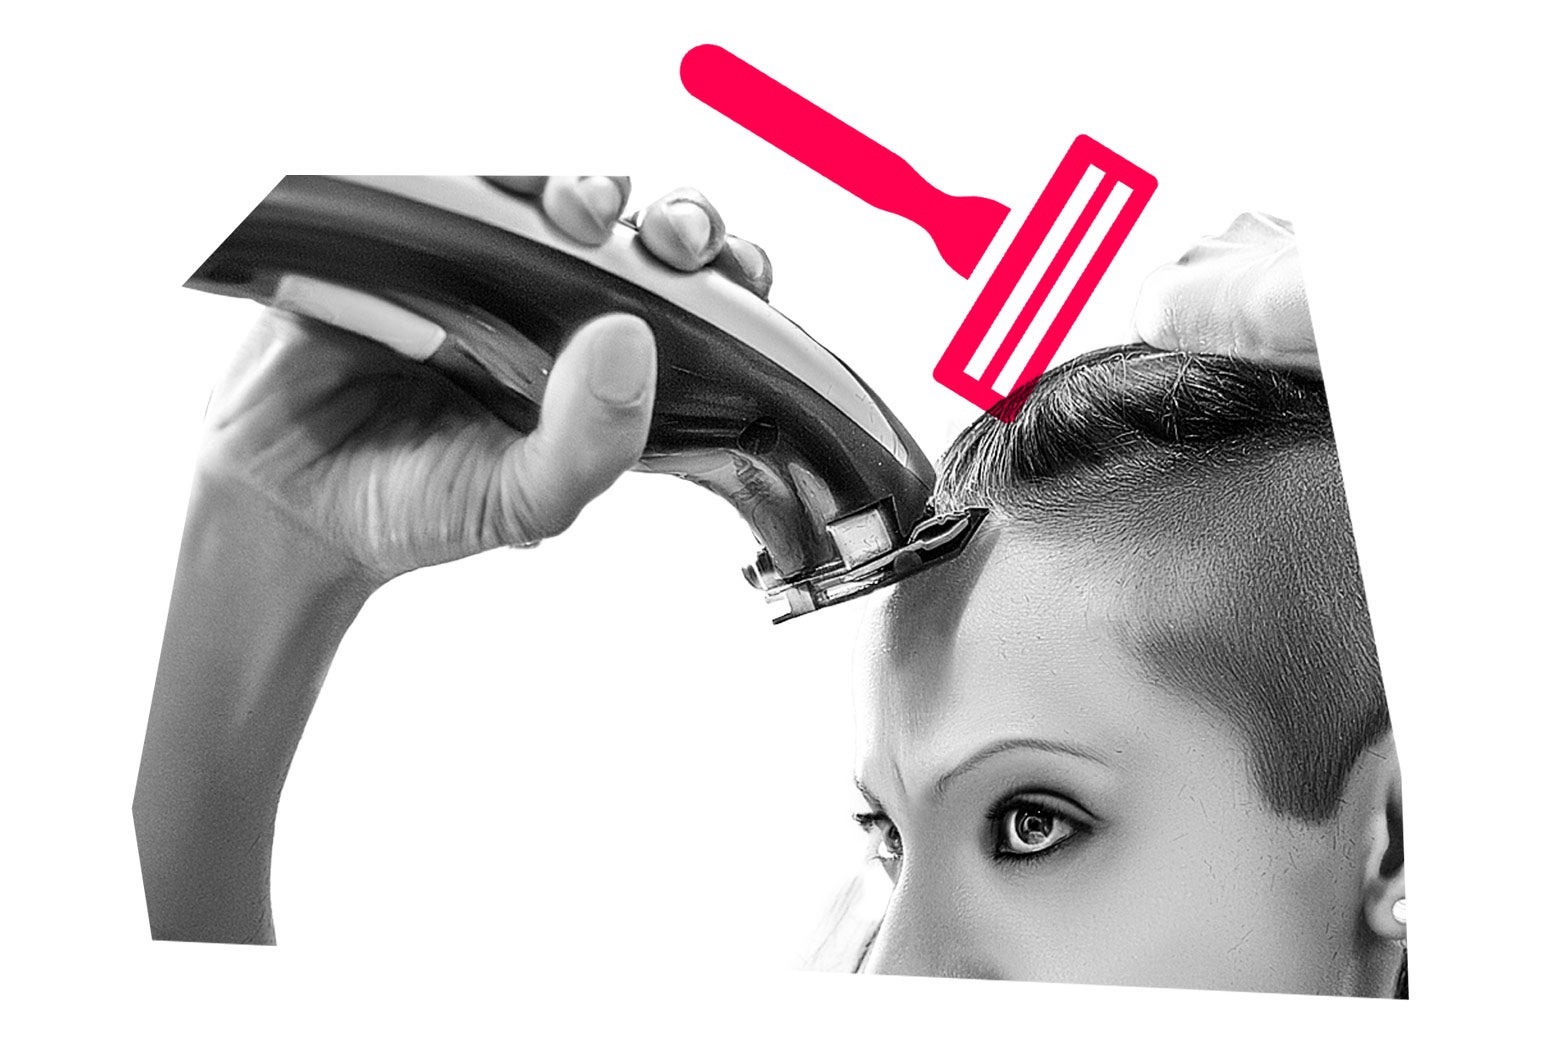 A woman holding a hair trimmer to the top of her head.